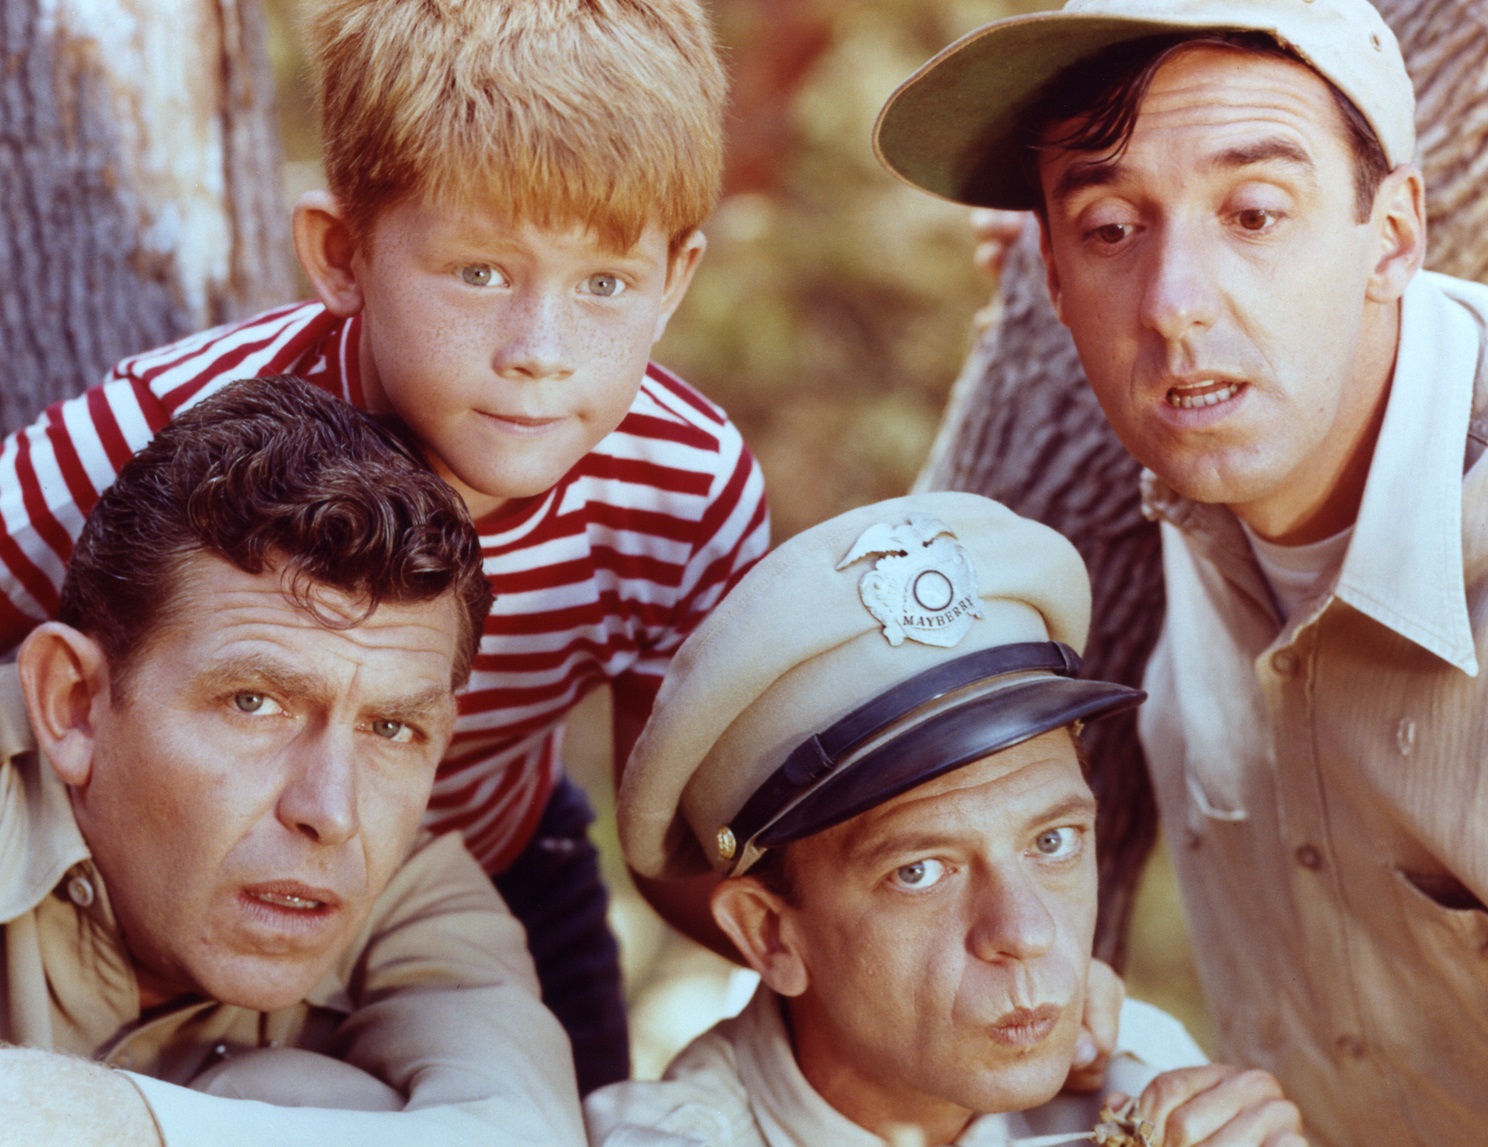 The Hardest Game of “Which Must Go” For Anyone Who Loves Classic TV The Andy Griffith Show